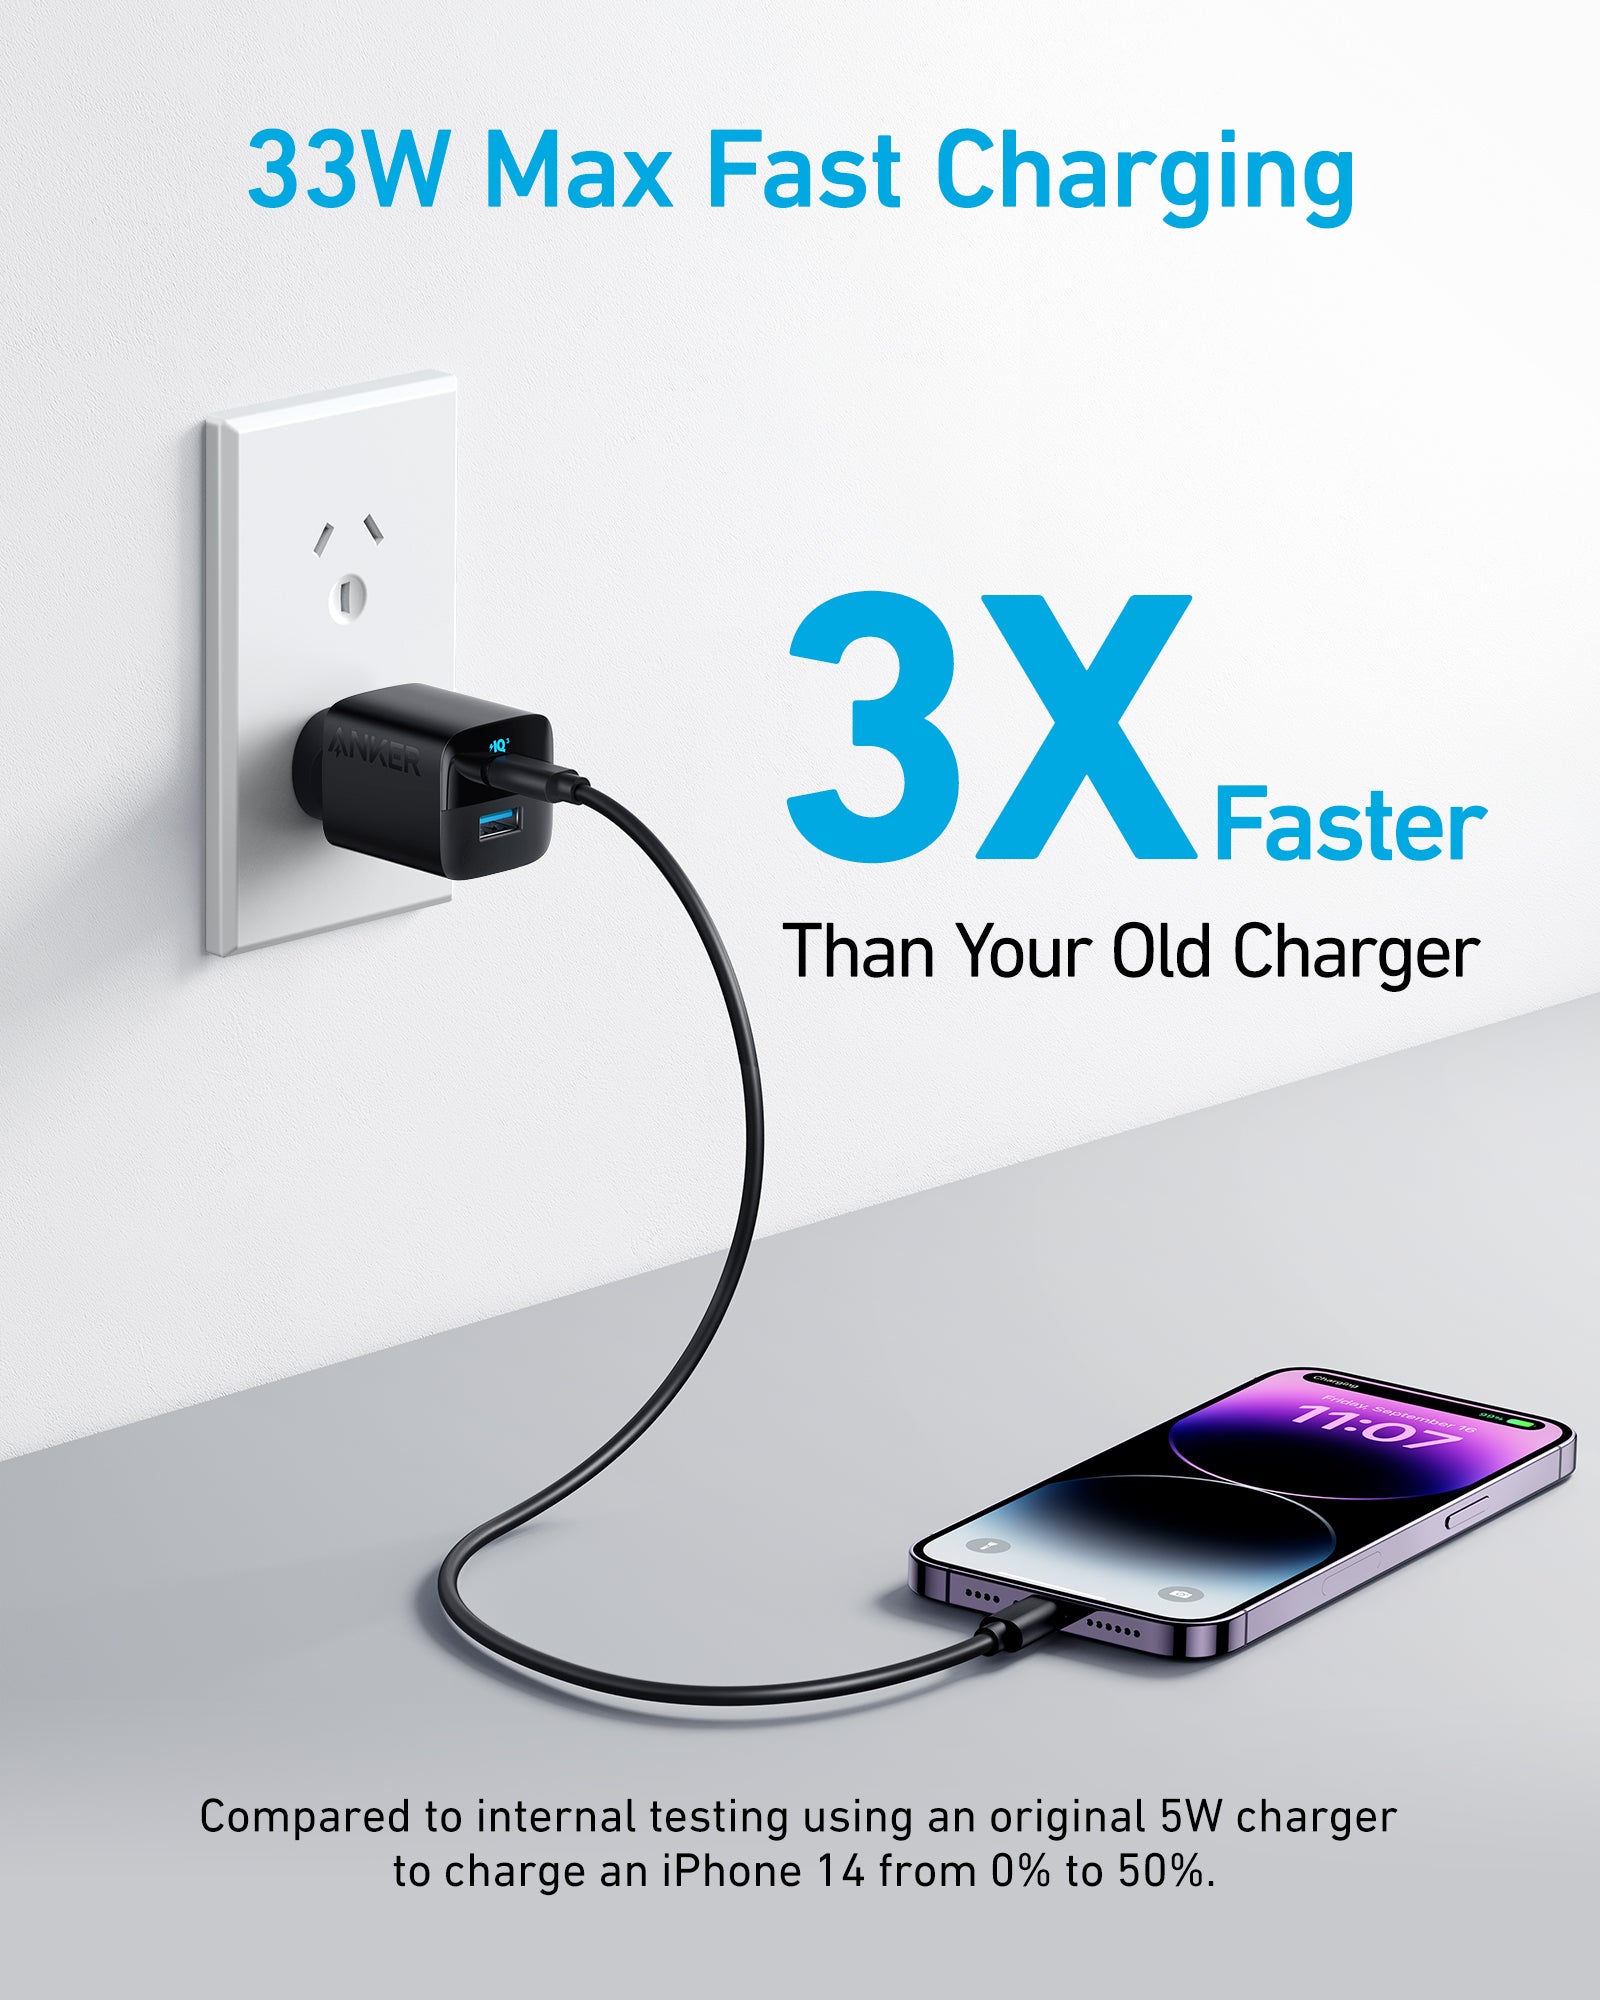 Anker 323 Charger (33W) - Anker AU